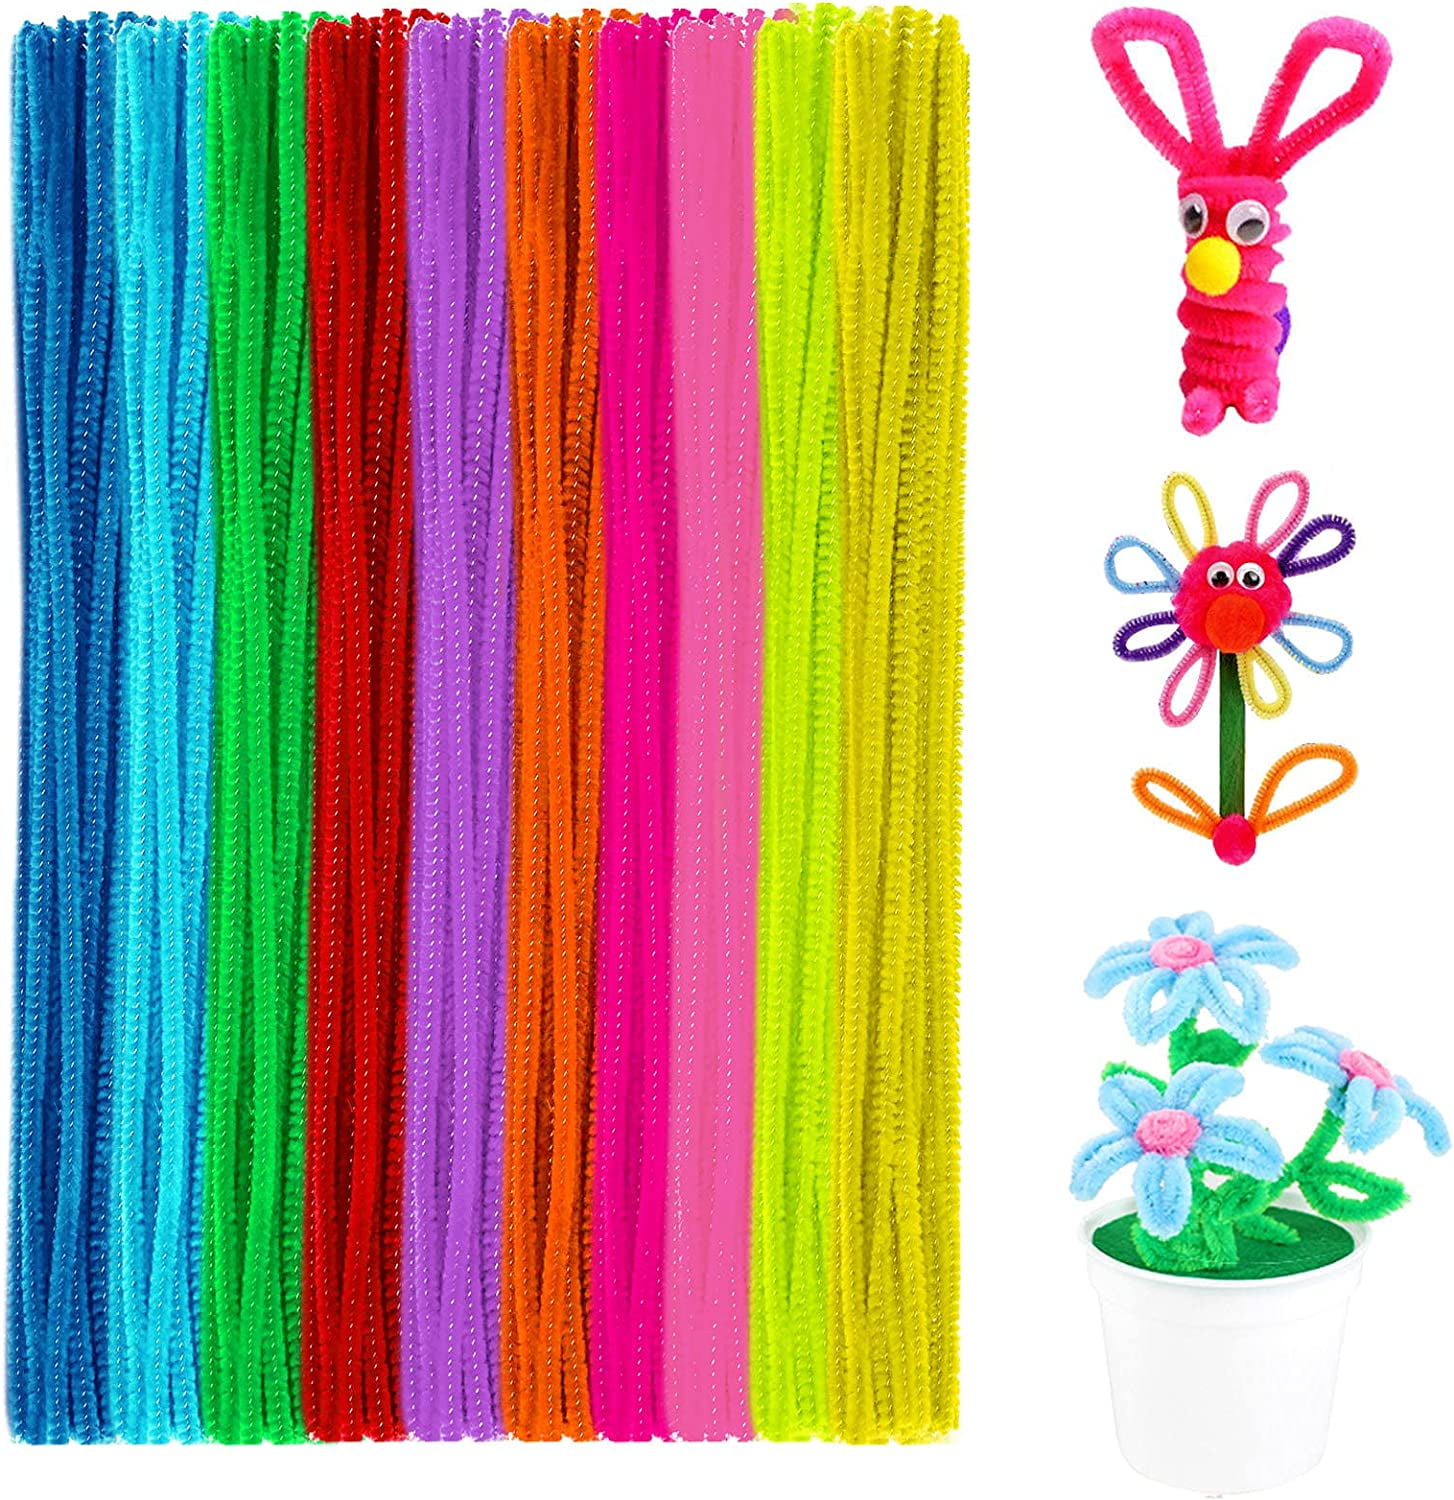 Saim Fuzzy Sticks, Pink Pipe Cleaners Chenille Stems 12 for Creative  Handmade Arts and Crafts, 100pcs 